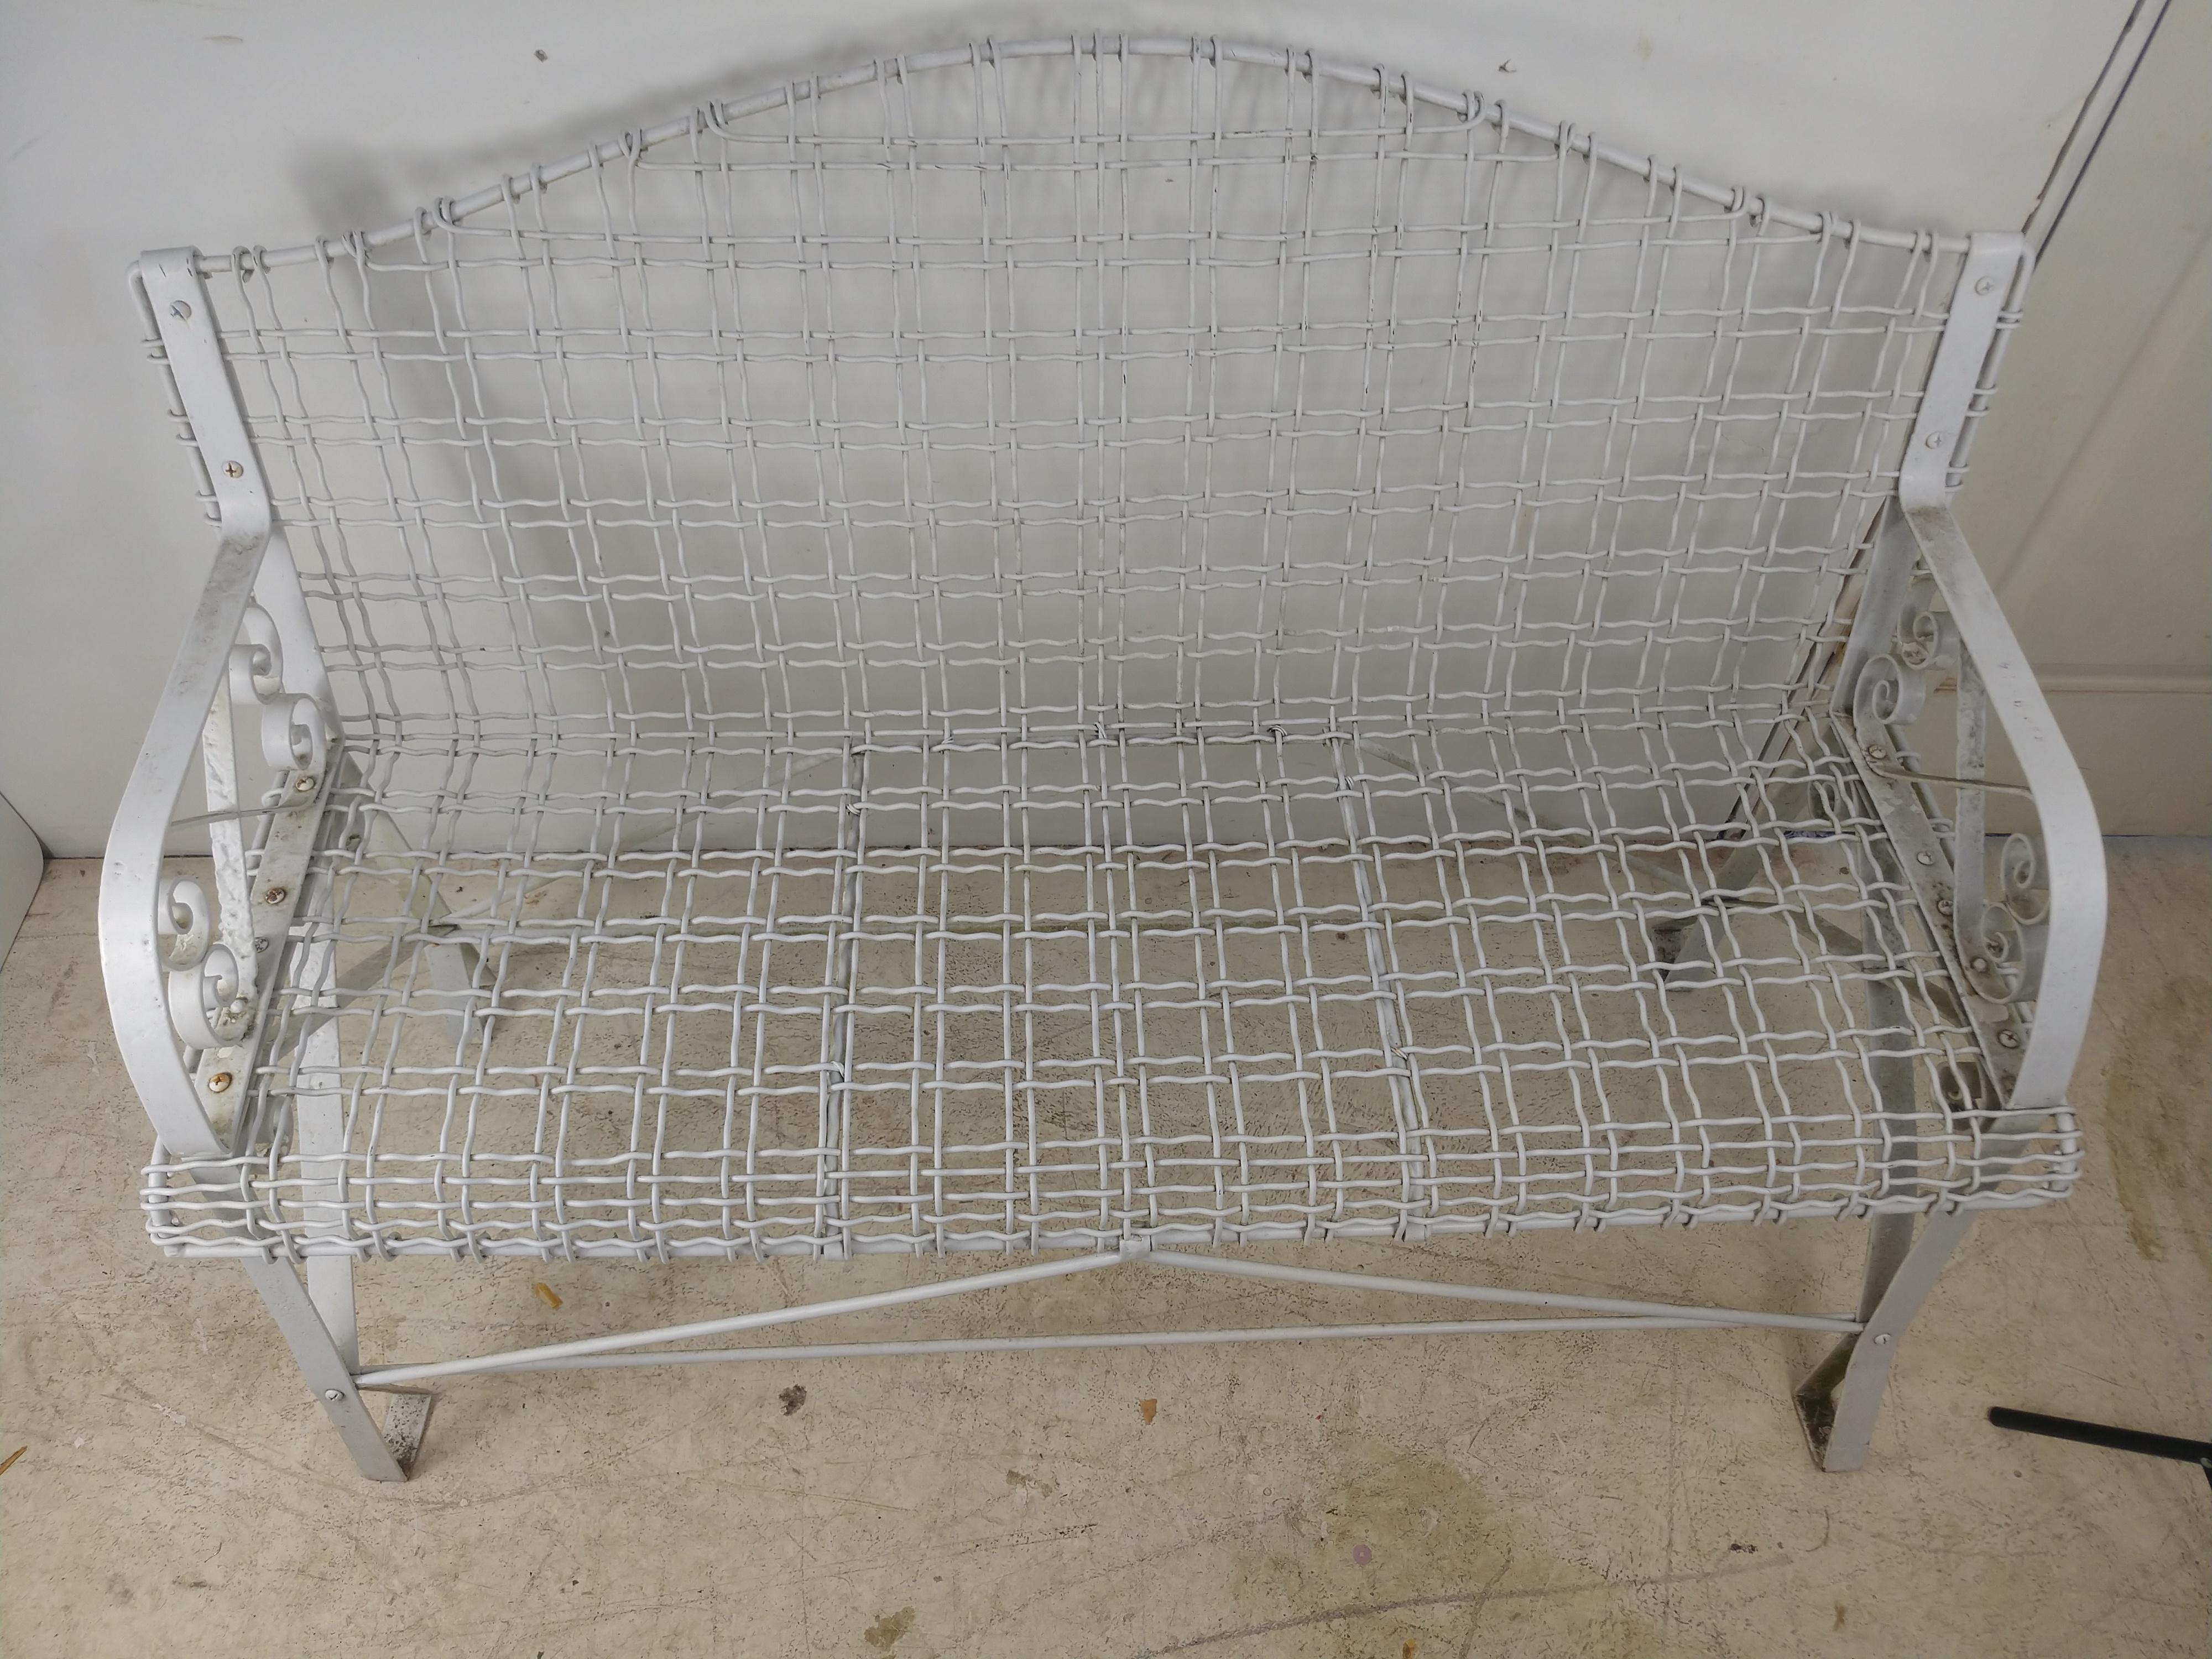 Wrapped wire and steel 2 seat garden bench. Very comfortable with arched back. Stable, not flimsy or awkward. Seat hgt. is 17.5. In excellent vintage condition with minimal wear.